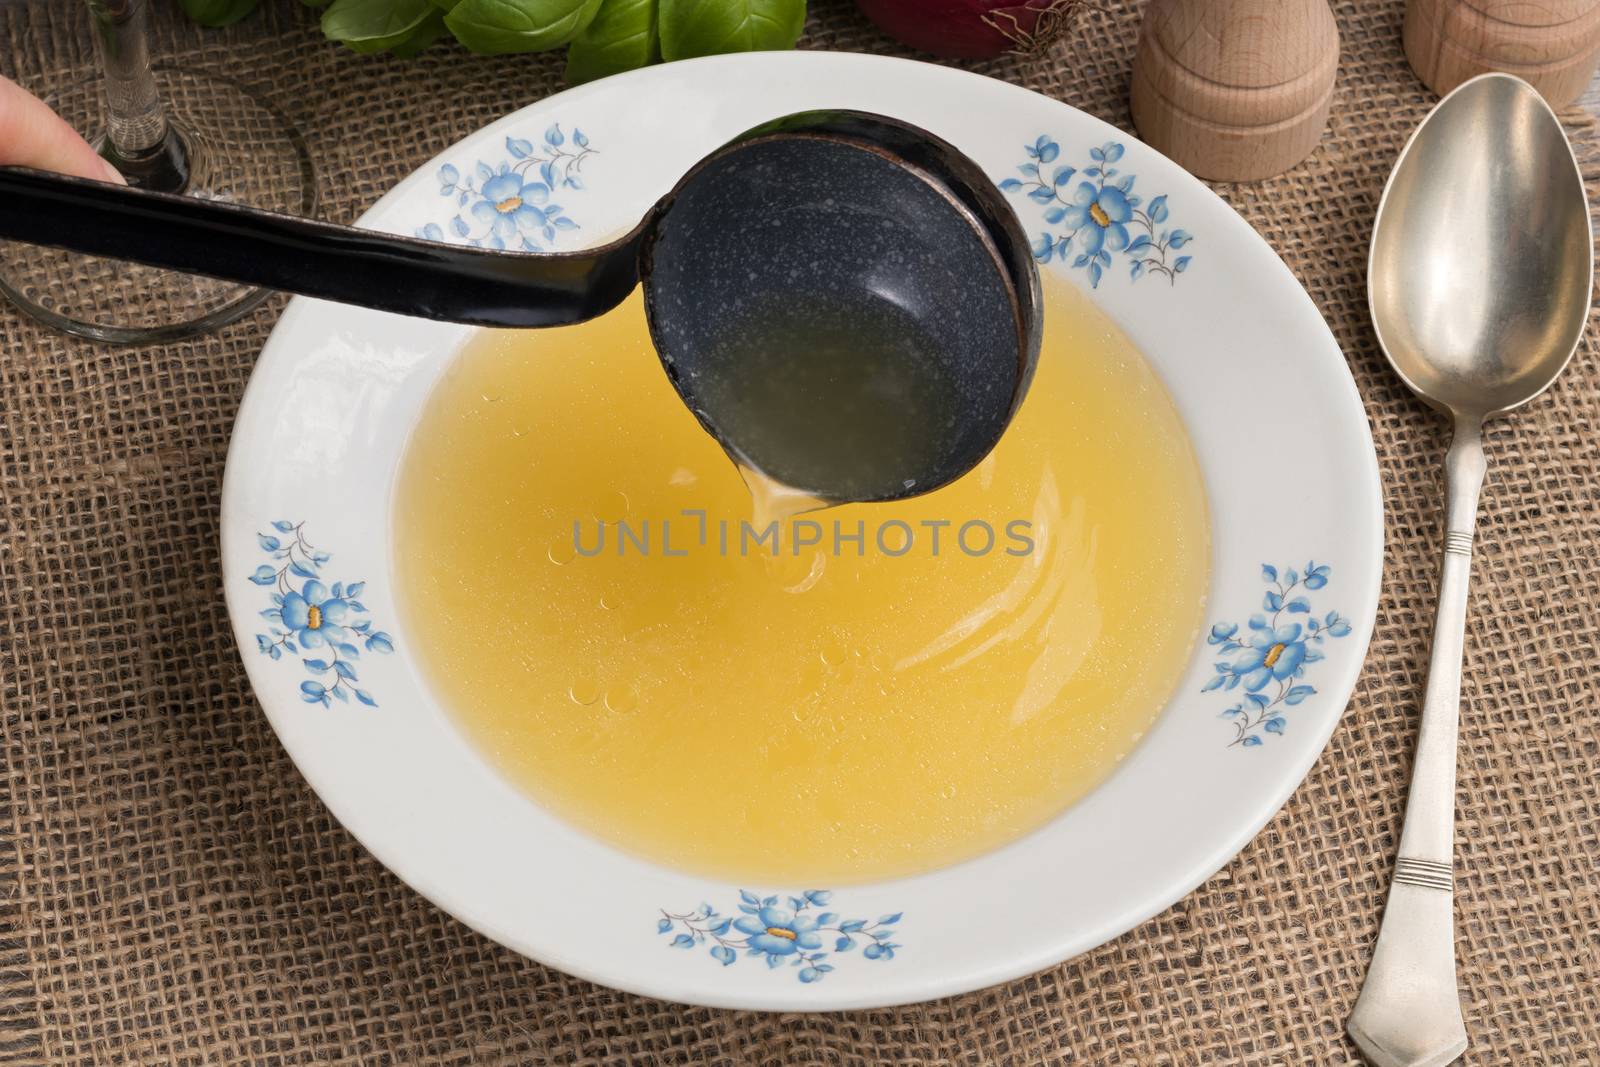 Pouring chicken bone broth into a soup plate with a ladle